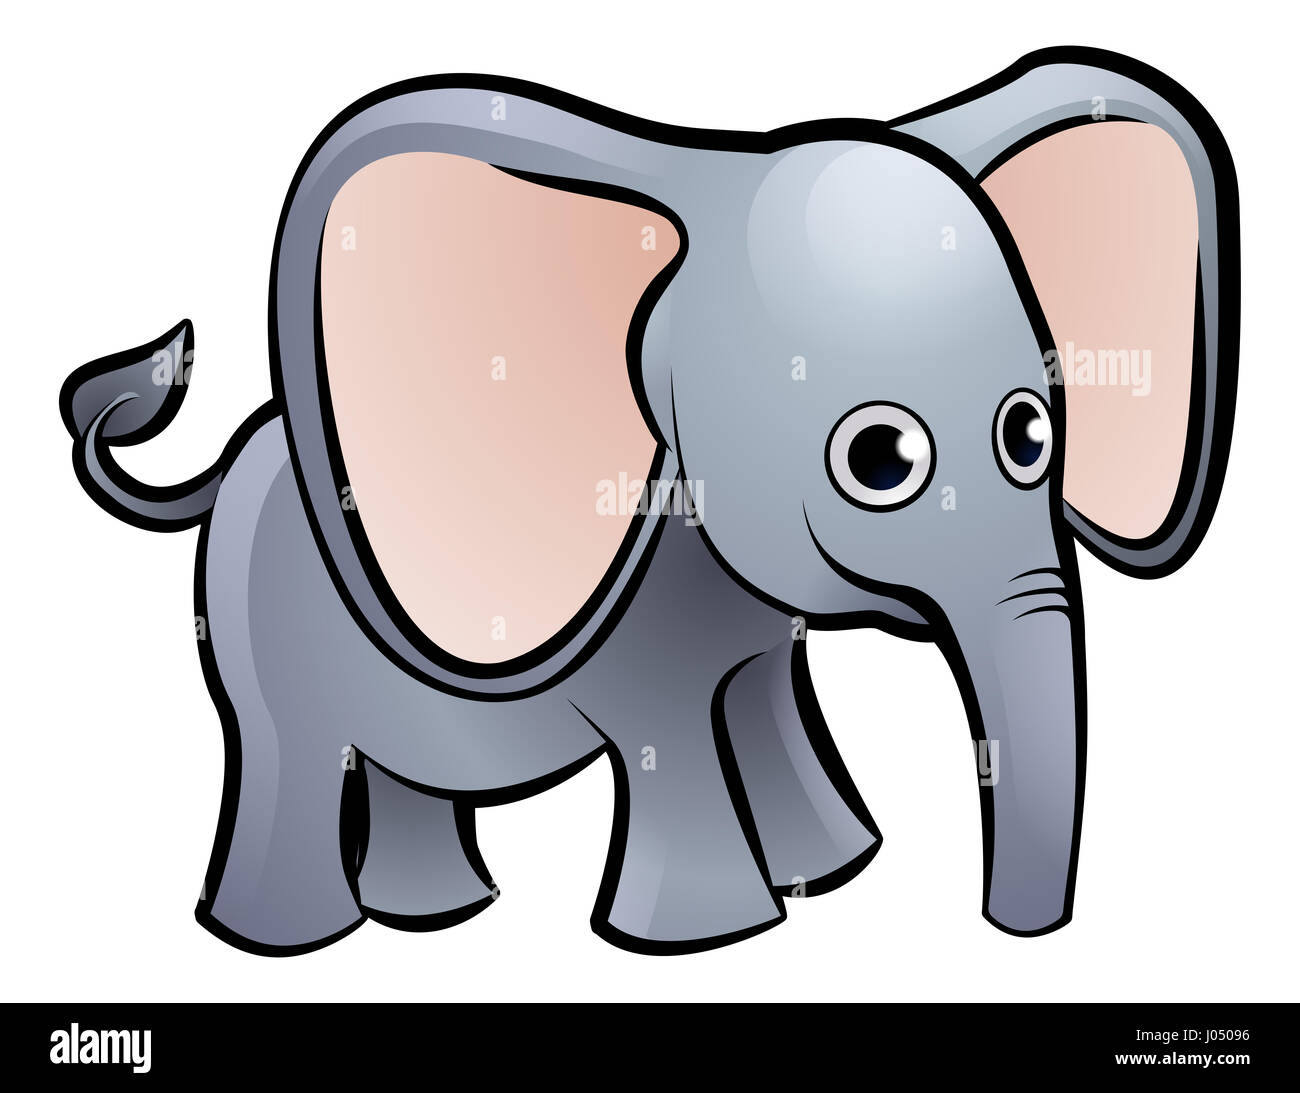 Clip art and cartoons animals hi-res stock photography and images - Alamy